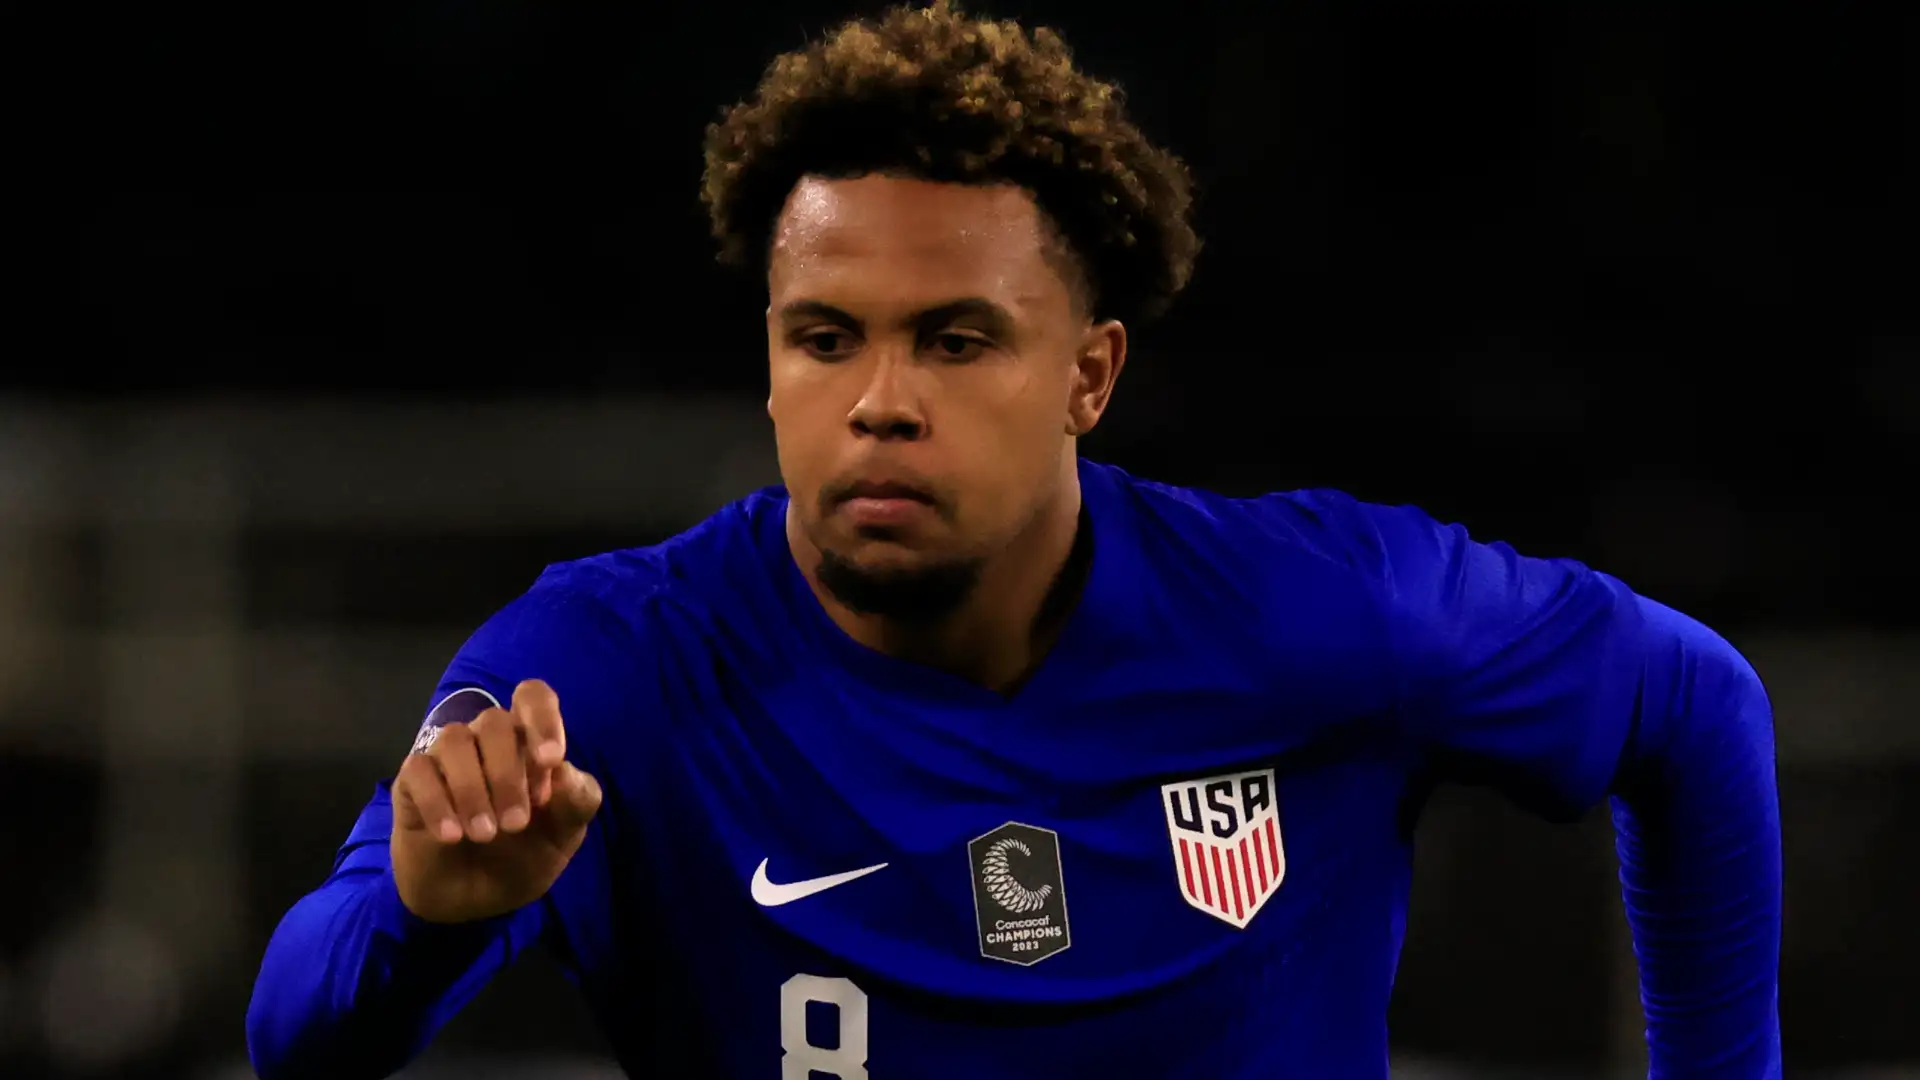 Transfer homecoming for USMNT star Weston McKennie? $15m MLS option for Juventus midfielder to consider amid links to Premier League giants Arsenal & Tottenham